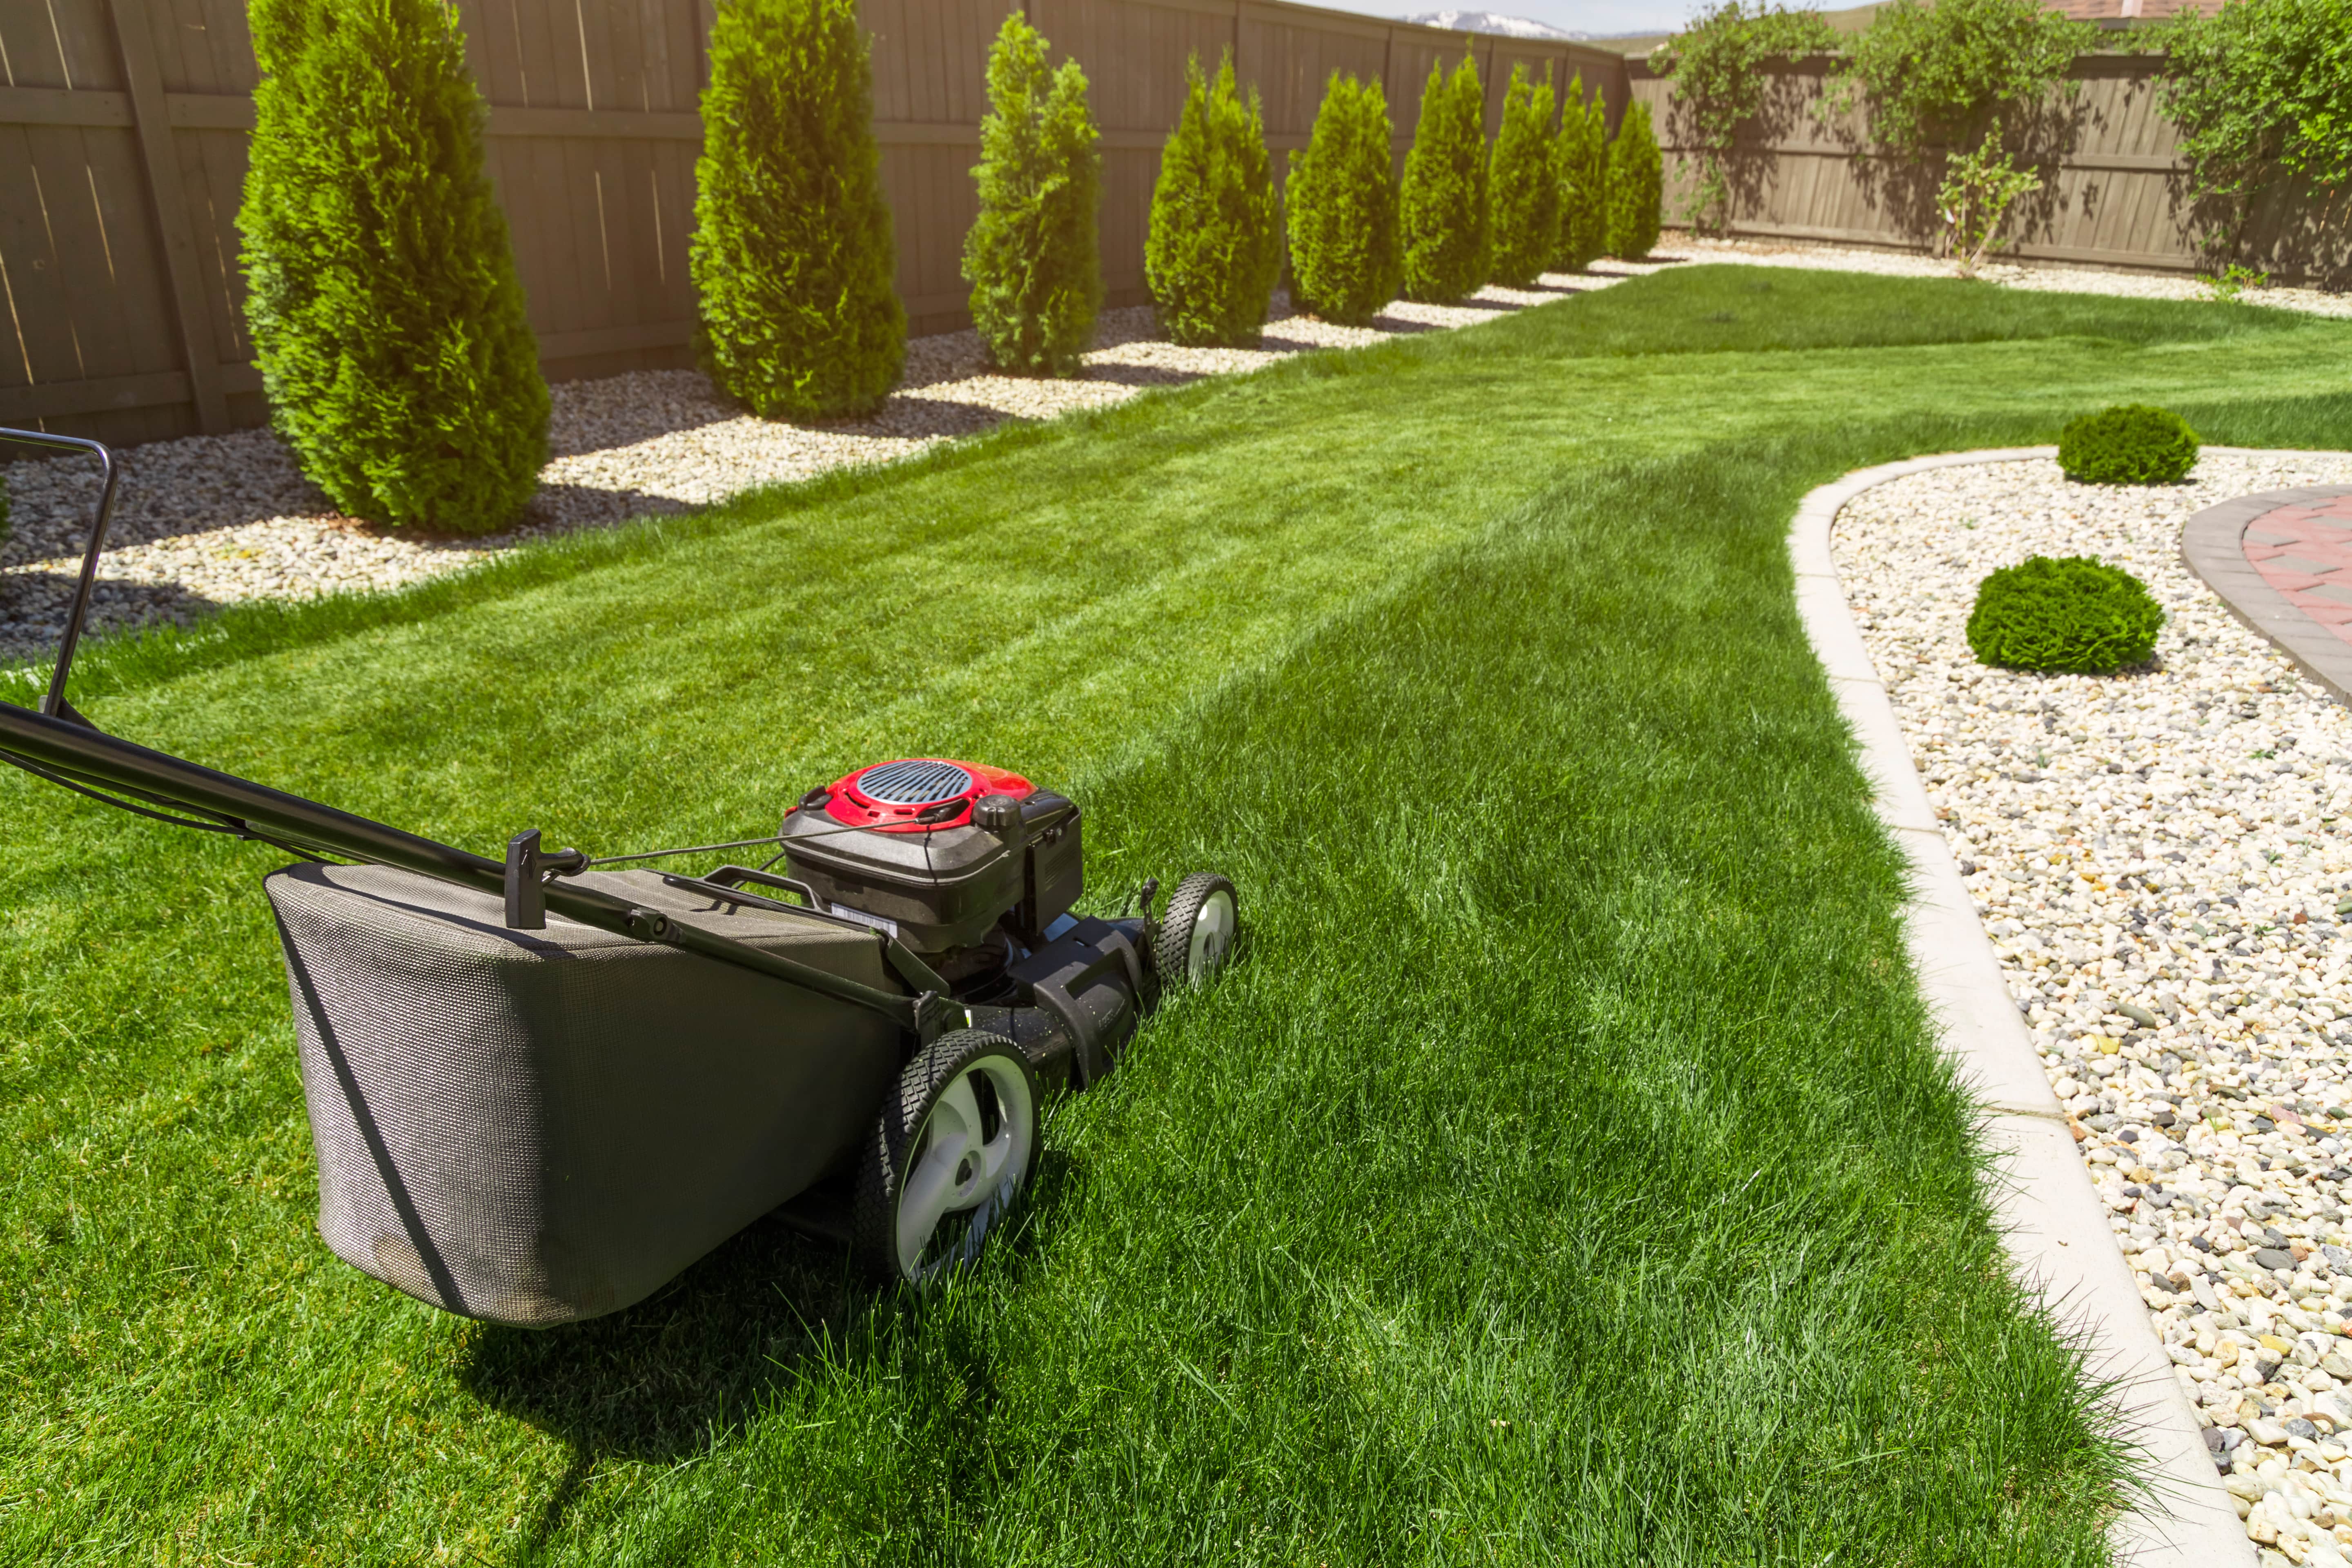 What to do with your lawn after winter